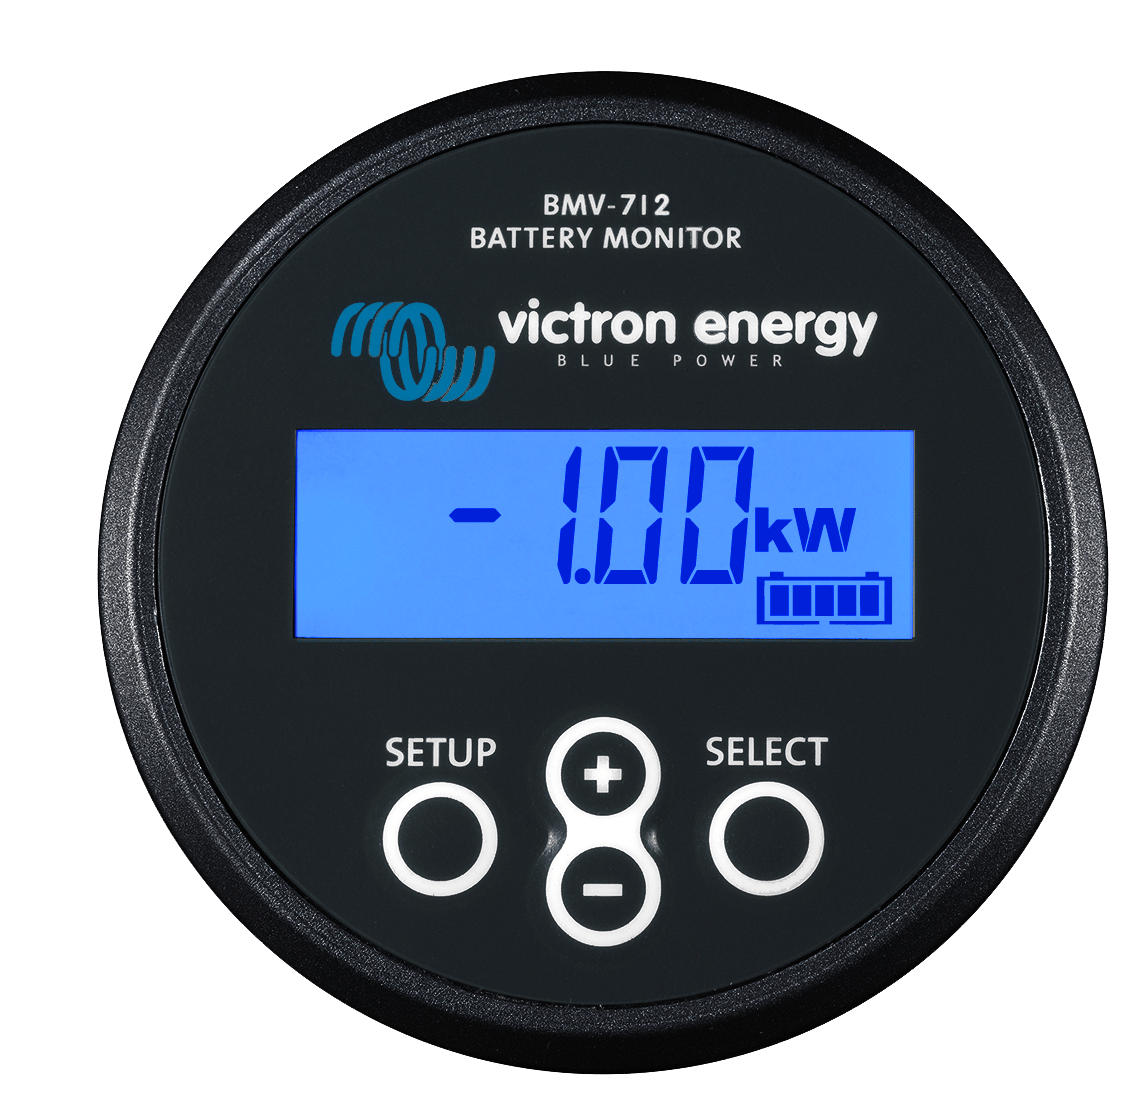 What is the battery capacity of the Victron BMV-712?